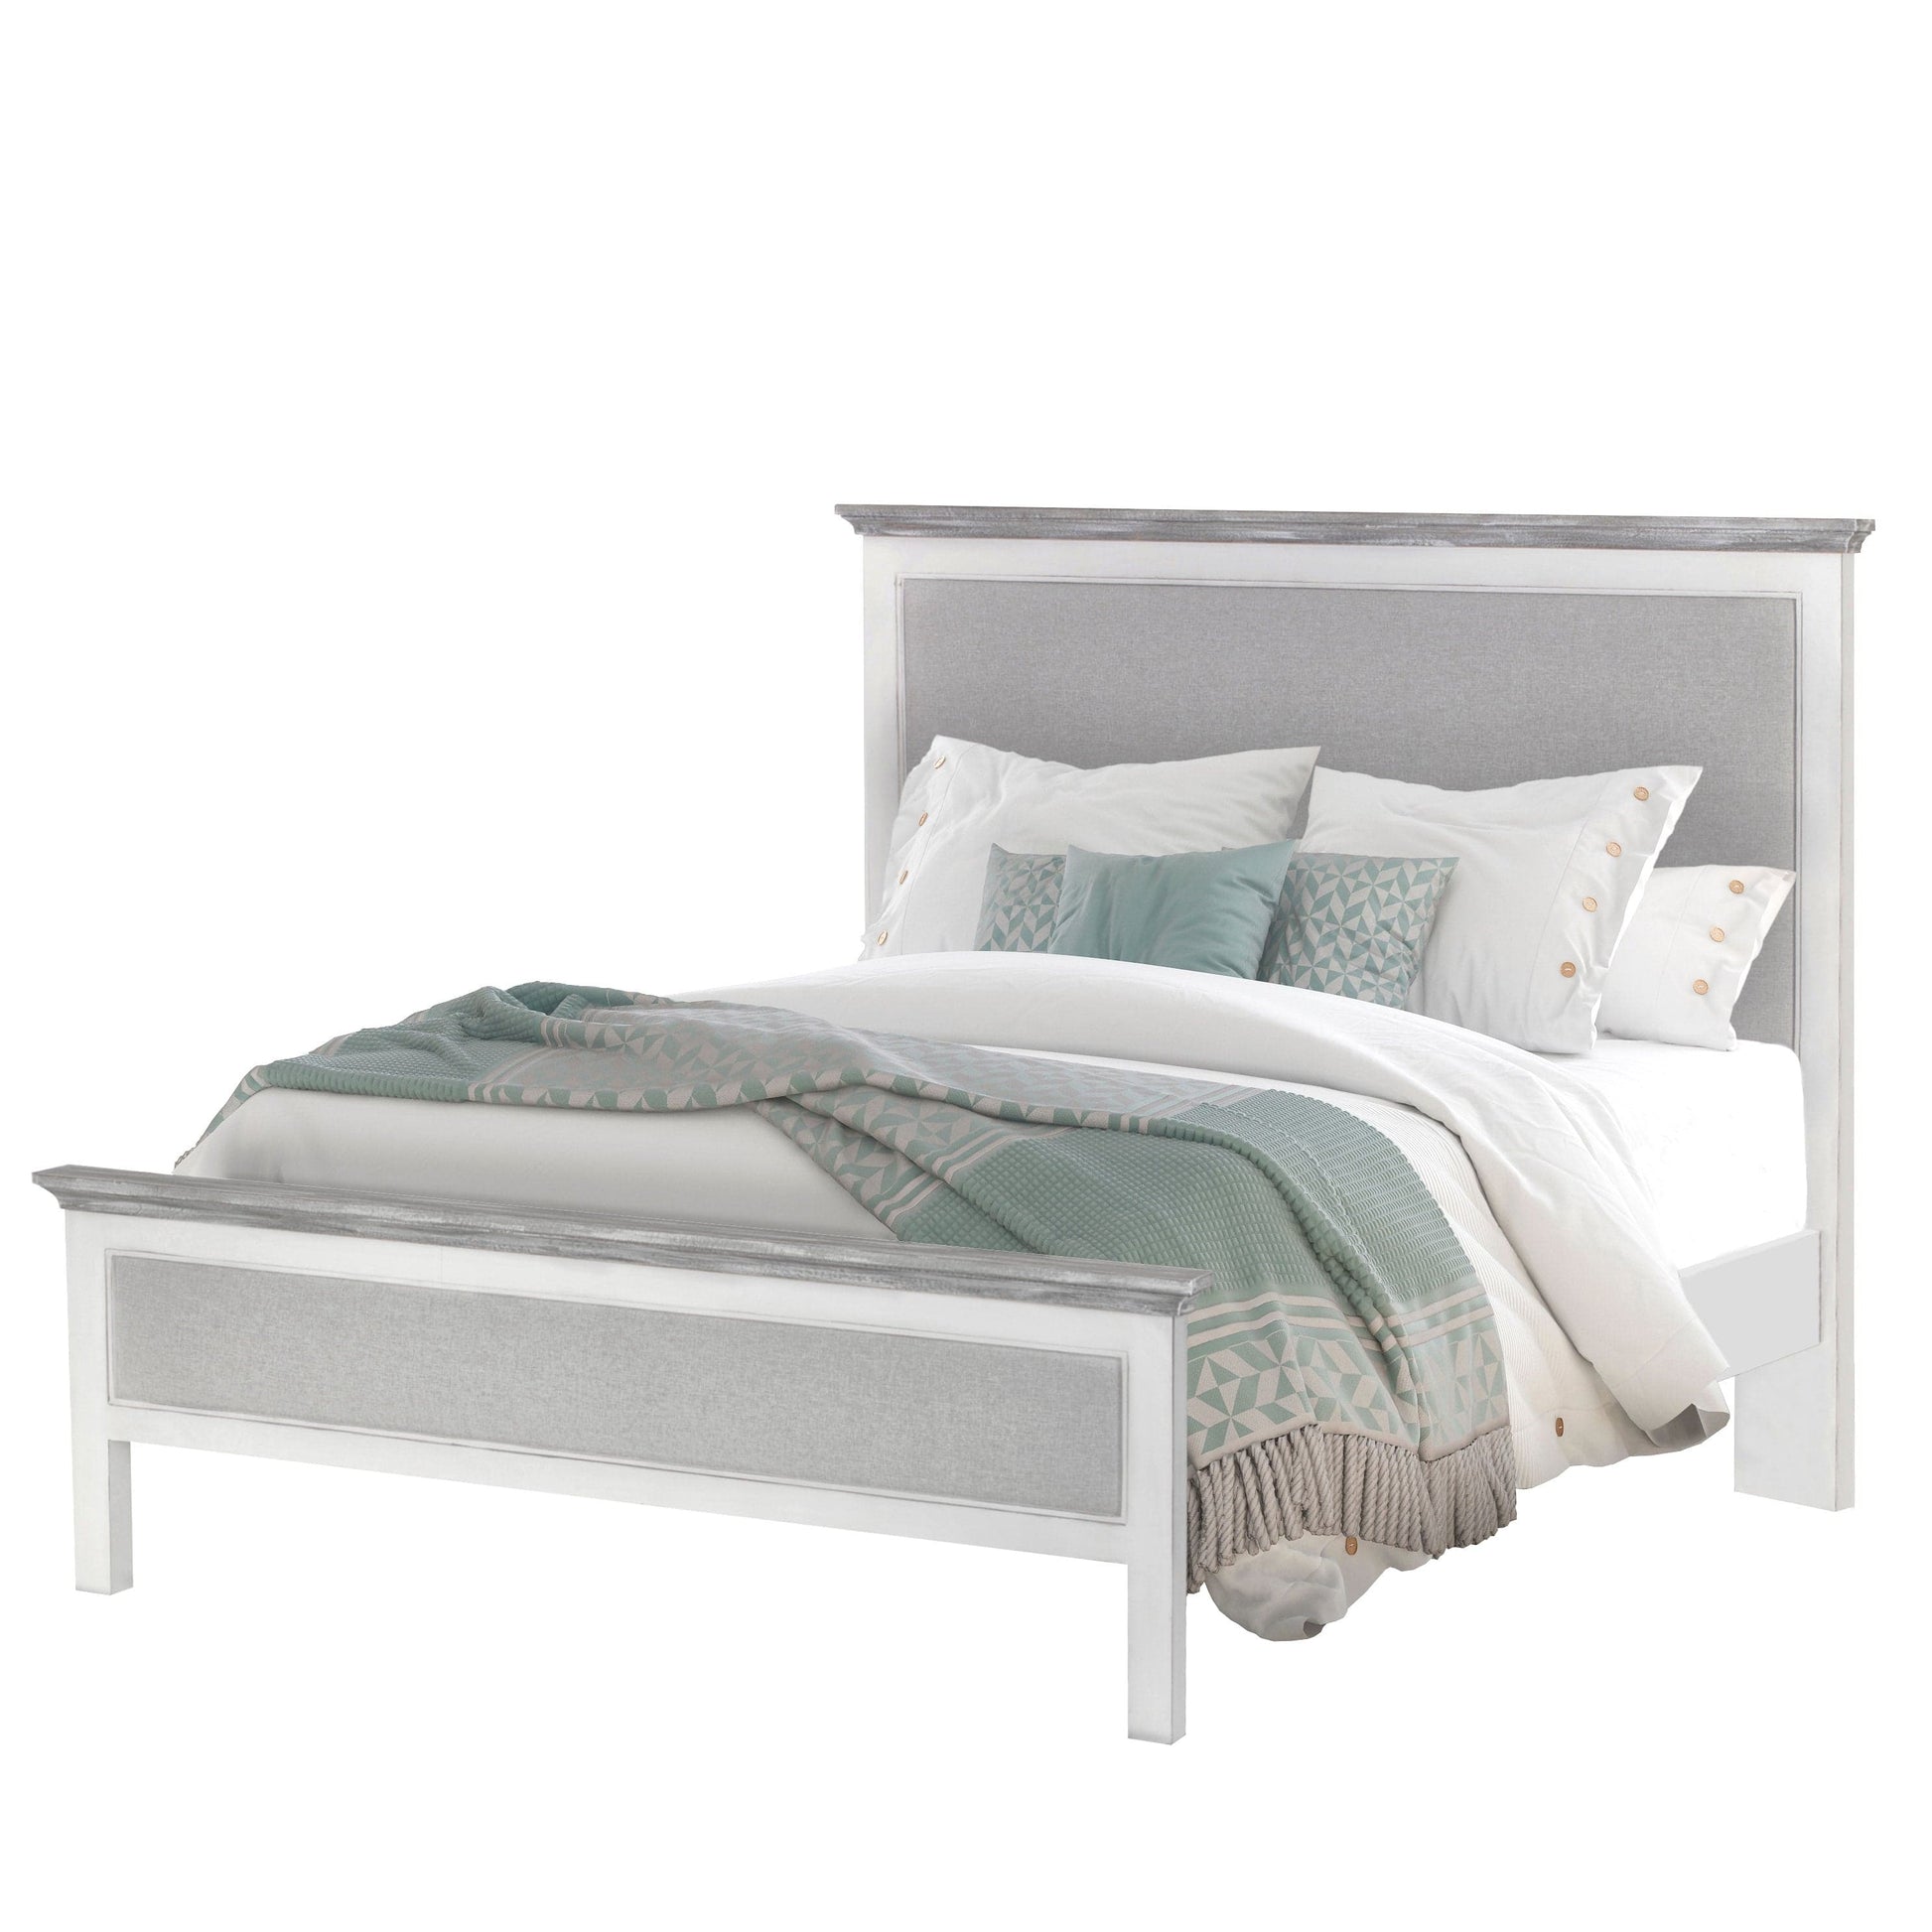 Sea Winds Trading Captiva Island Queen Bed B863QBED Indoor Sea Winds Trading Co 